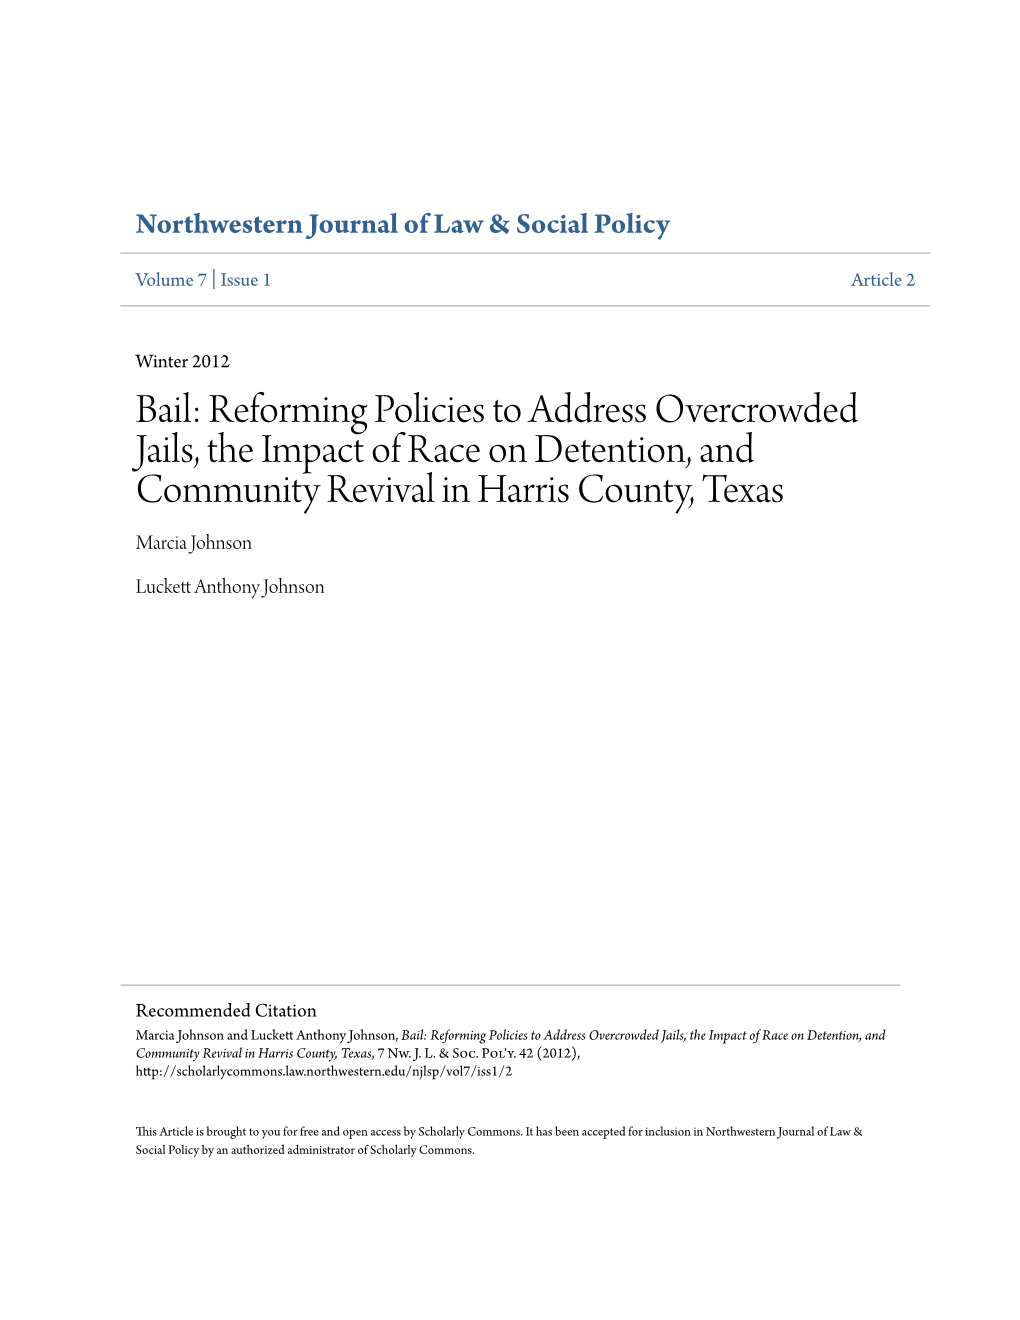 Bail: Reforming Policies to Address Overcrowded Jails, the Impact of Race on Detention, and Community Revival in Harris County, Texas Marcia Johnson